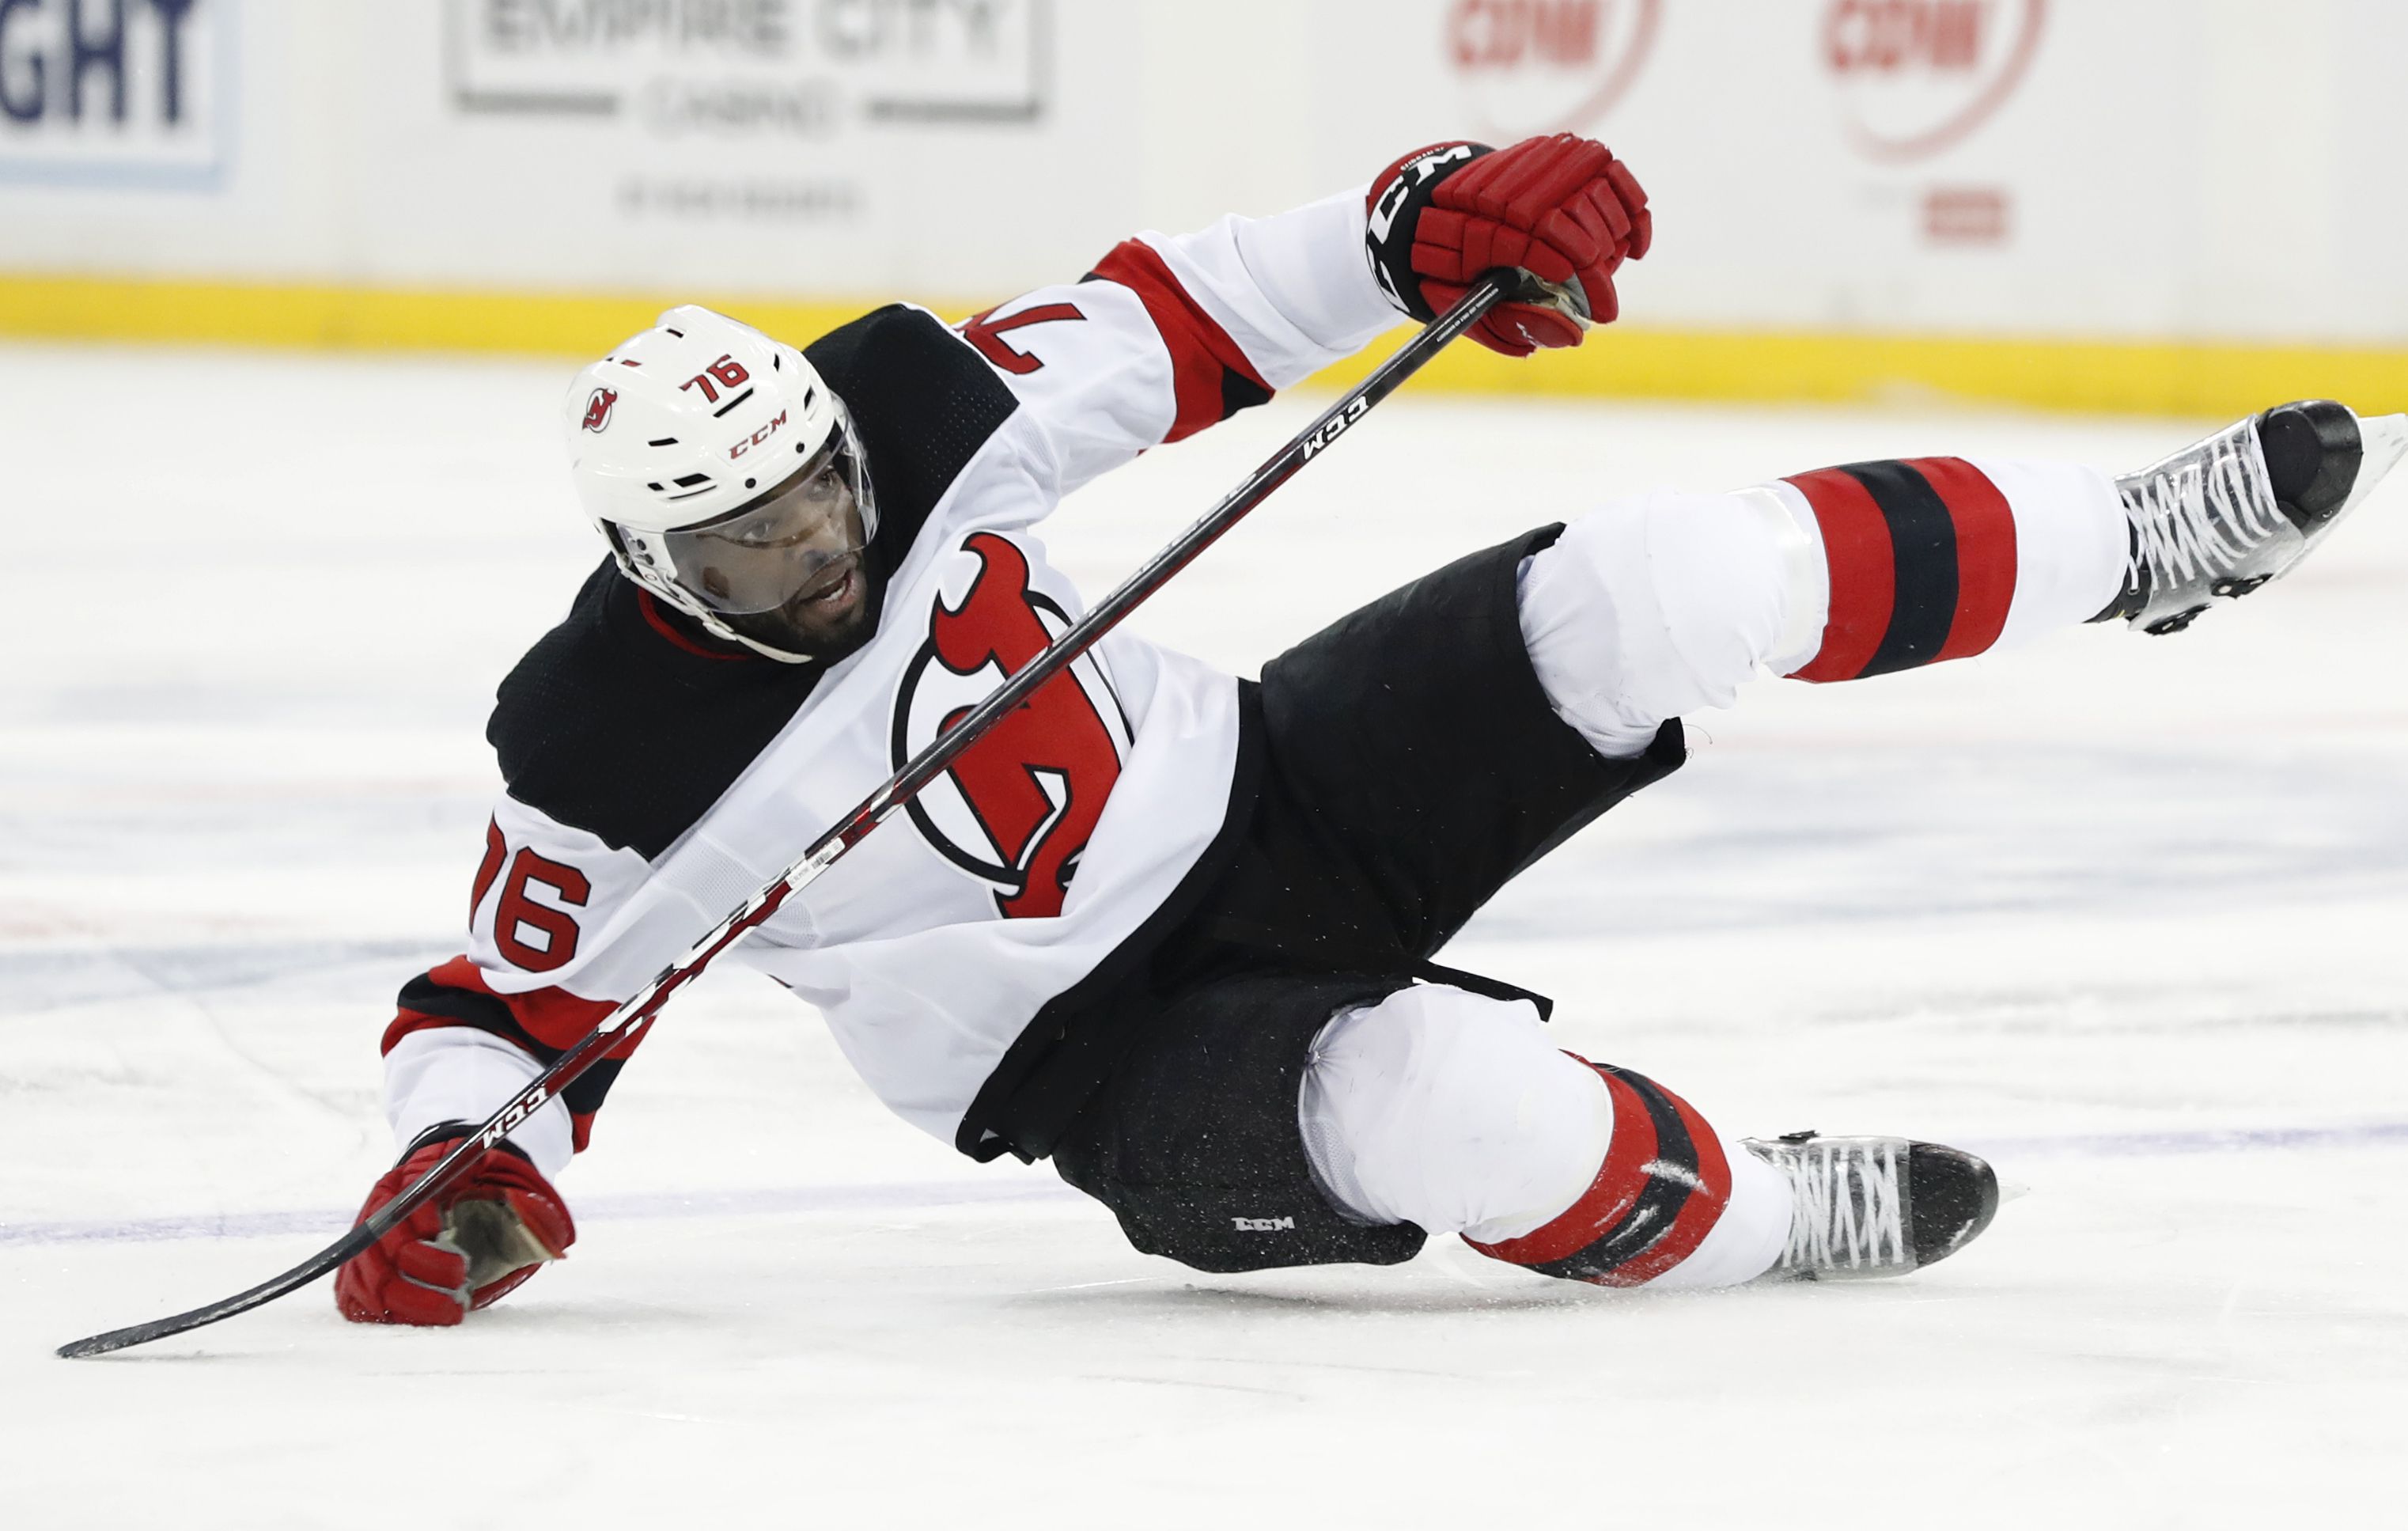 Devils' P.K. Subban should be remembered for off-the-ice legacy